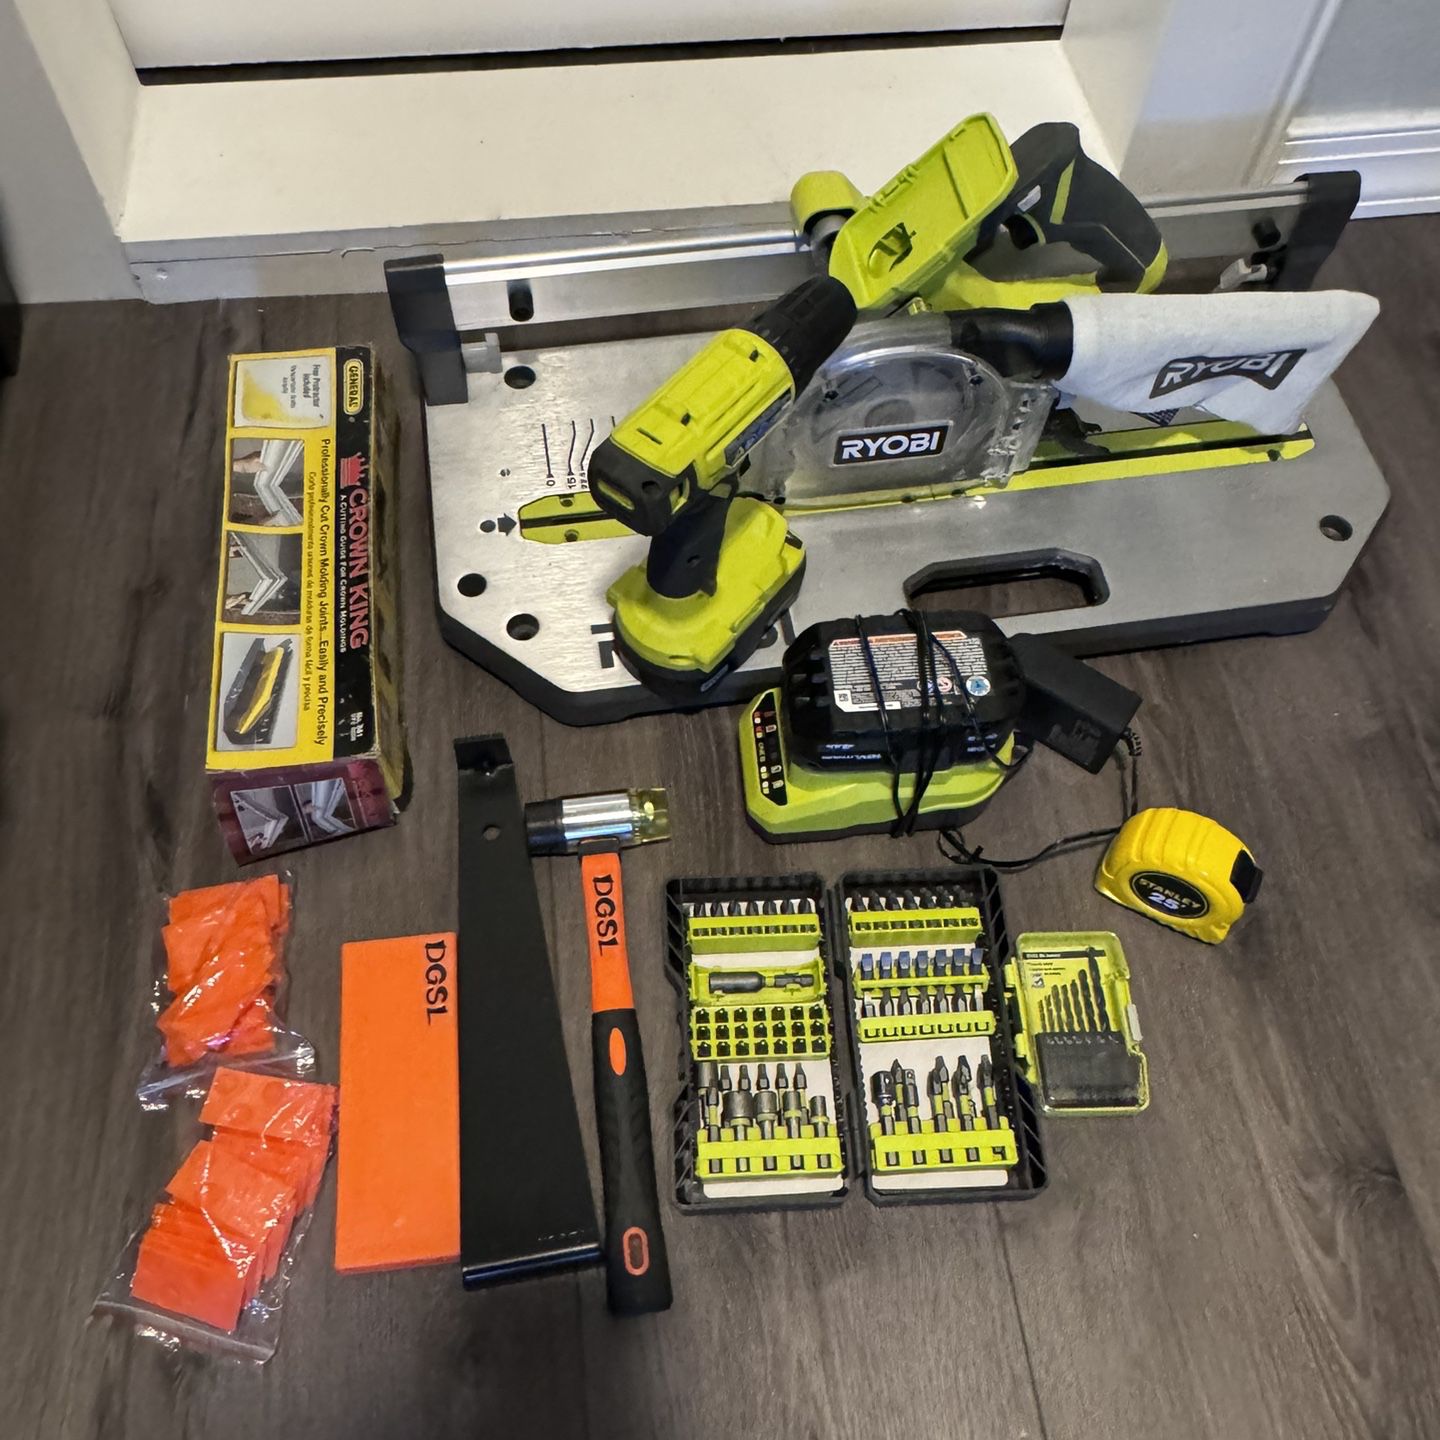 Cordless Flooring Saw with Blade, High Capacity Battery, Drill, Crown Molding Guide And Flooring Tools